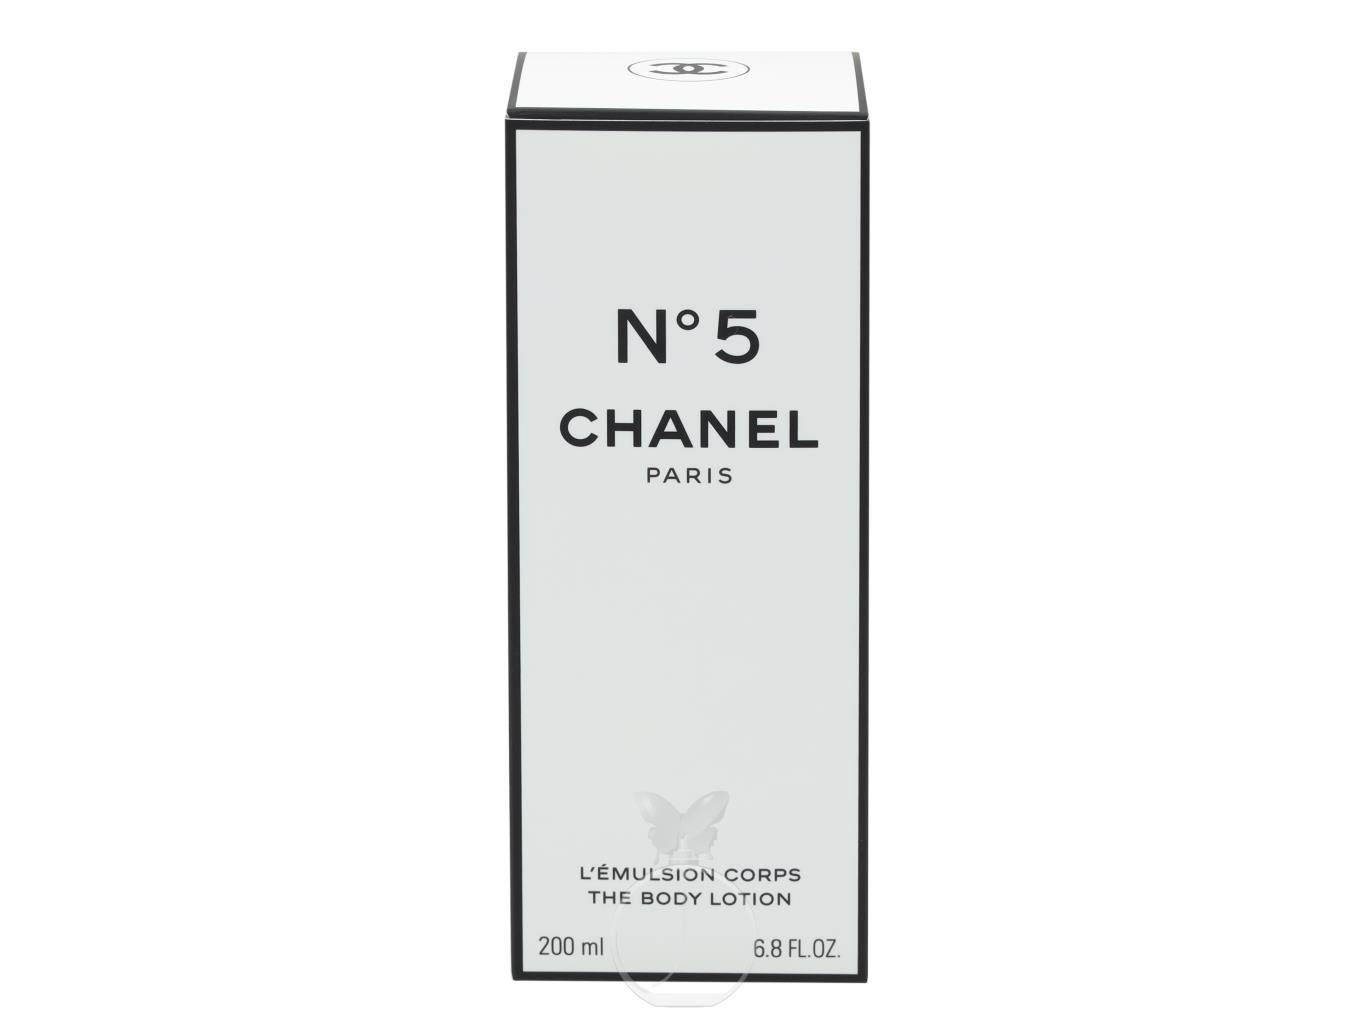 CHANEL Bodylotion Chanel No 5 Body Lotion 200 ml Packung